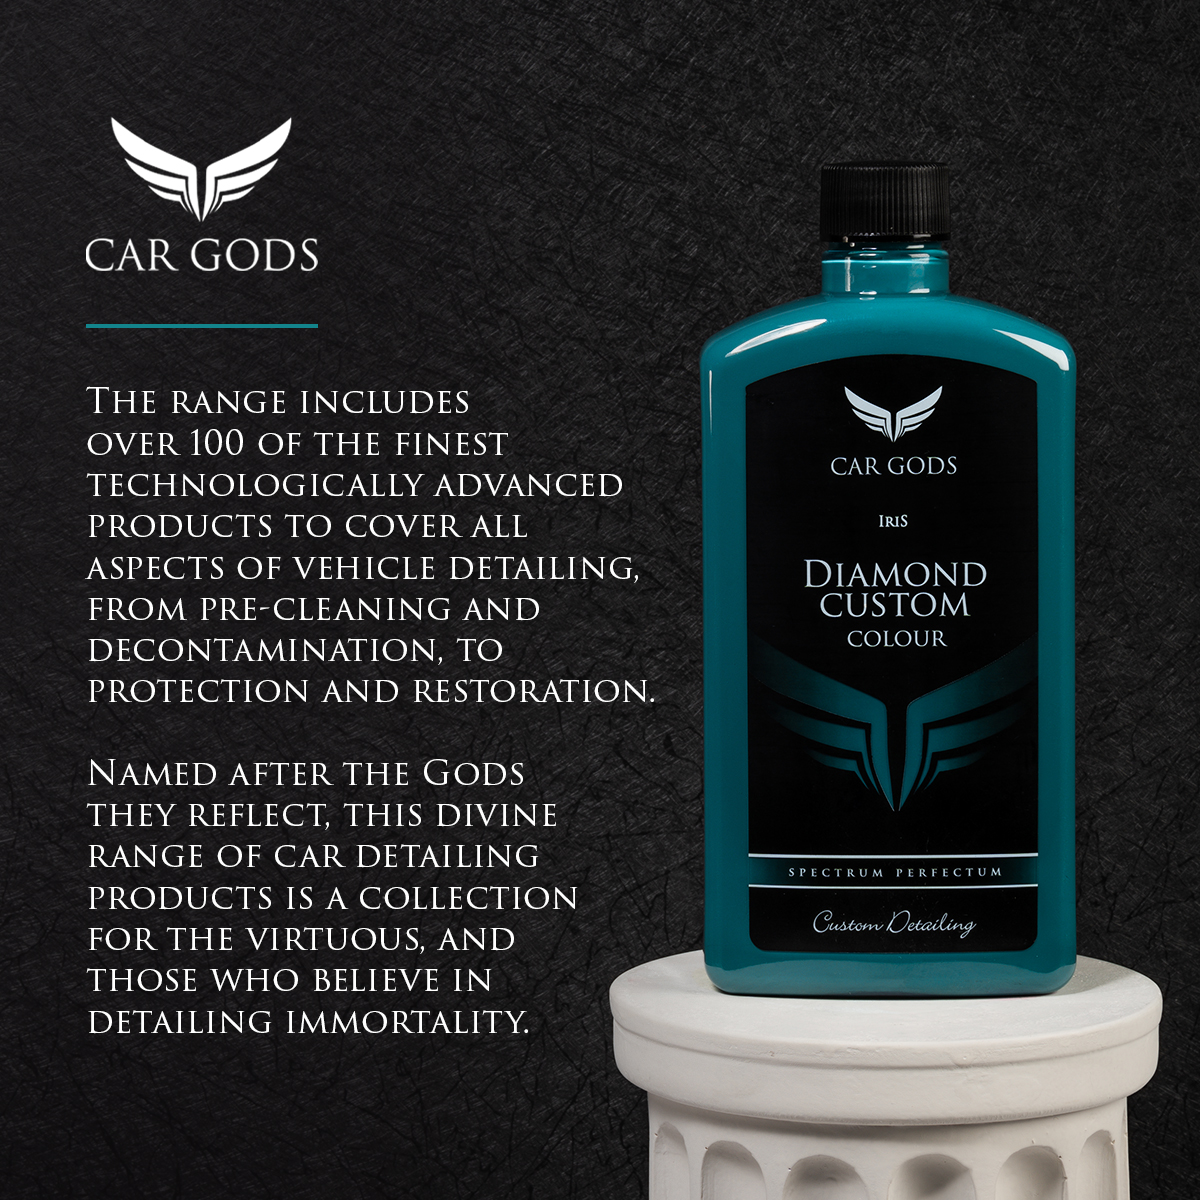 The Car Gods range includes over 100 of the finest technologically advanced products to cover all aspects of vehicle detailing, from pre-cleaning and decontamination, to protection and restoration. Named after the Gods they reflect, this divine range of car detailing products is a collection for the virtuous, and those who believe in detailing immortality.